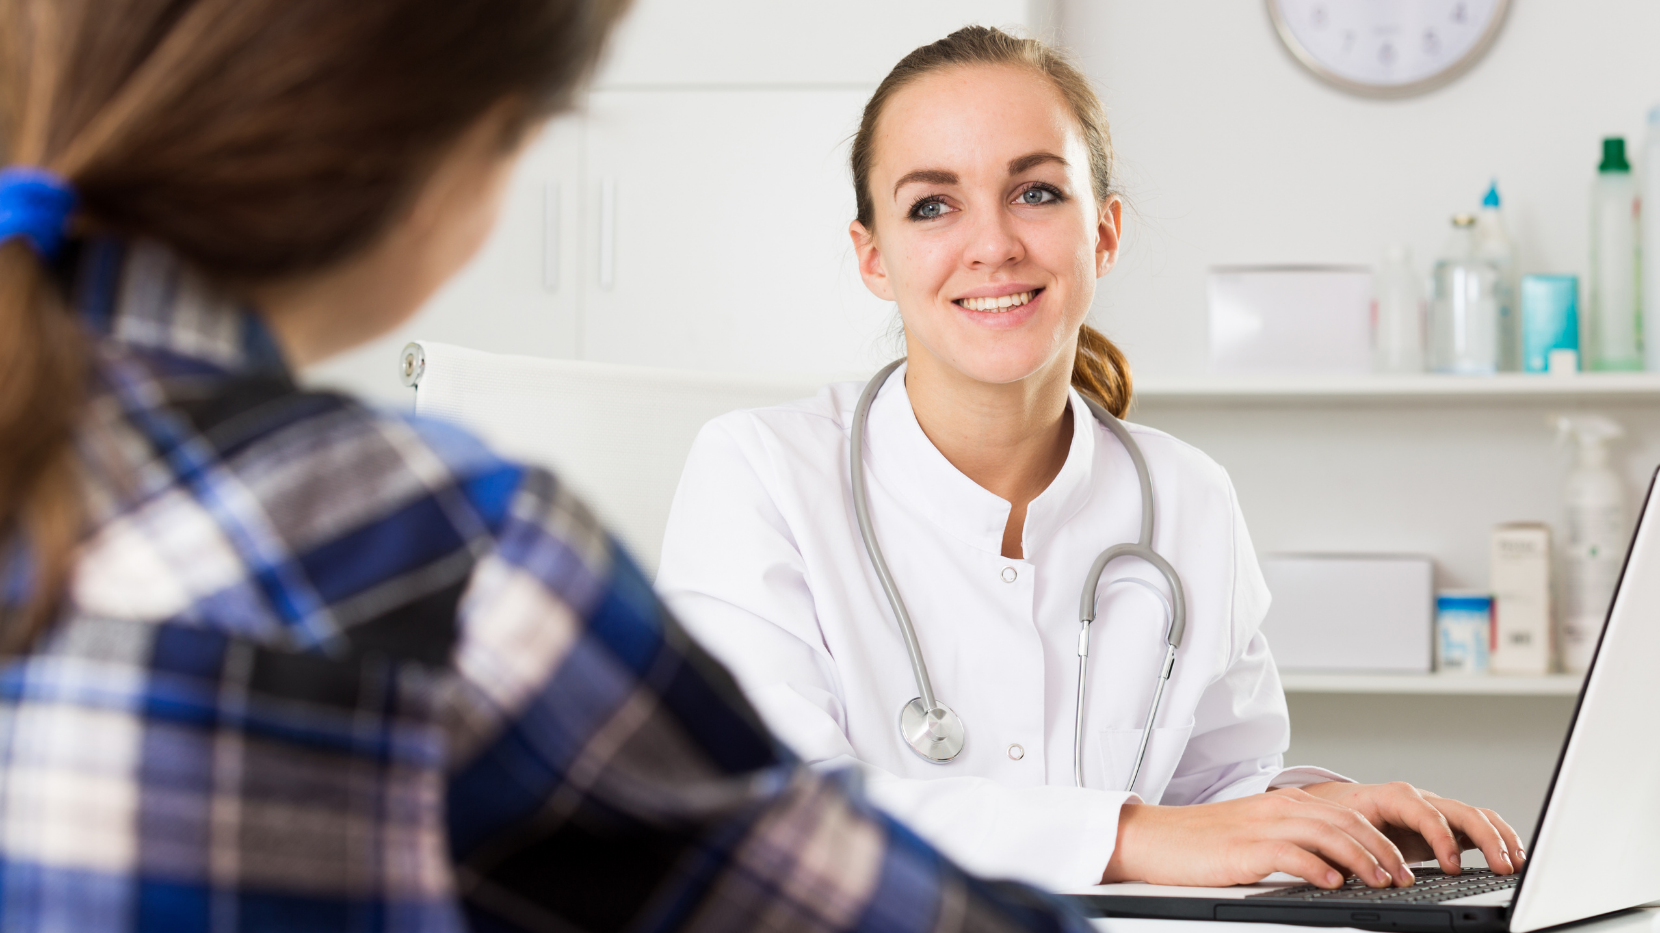 Woman Speaking With Her Doctor About a Pap Test